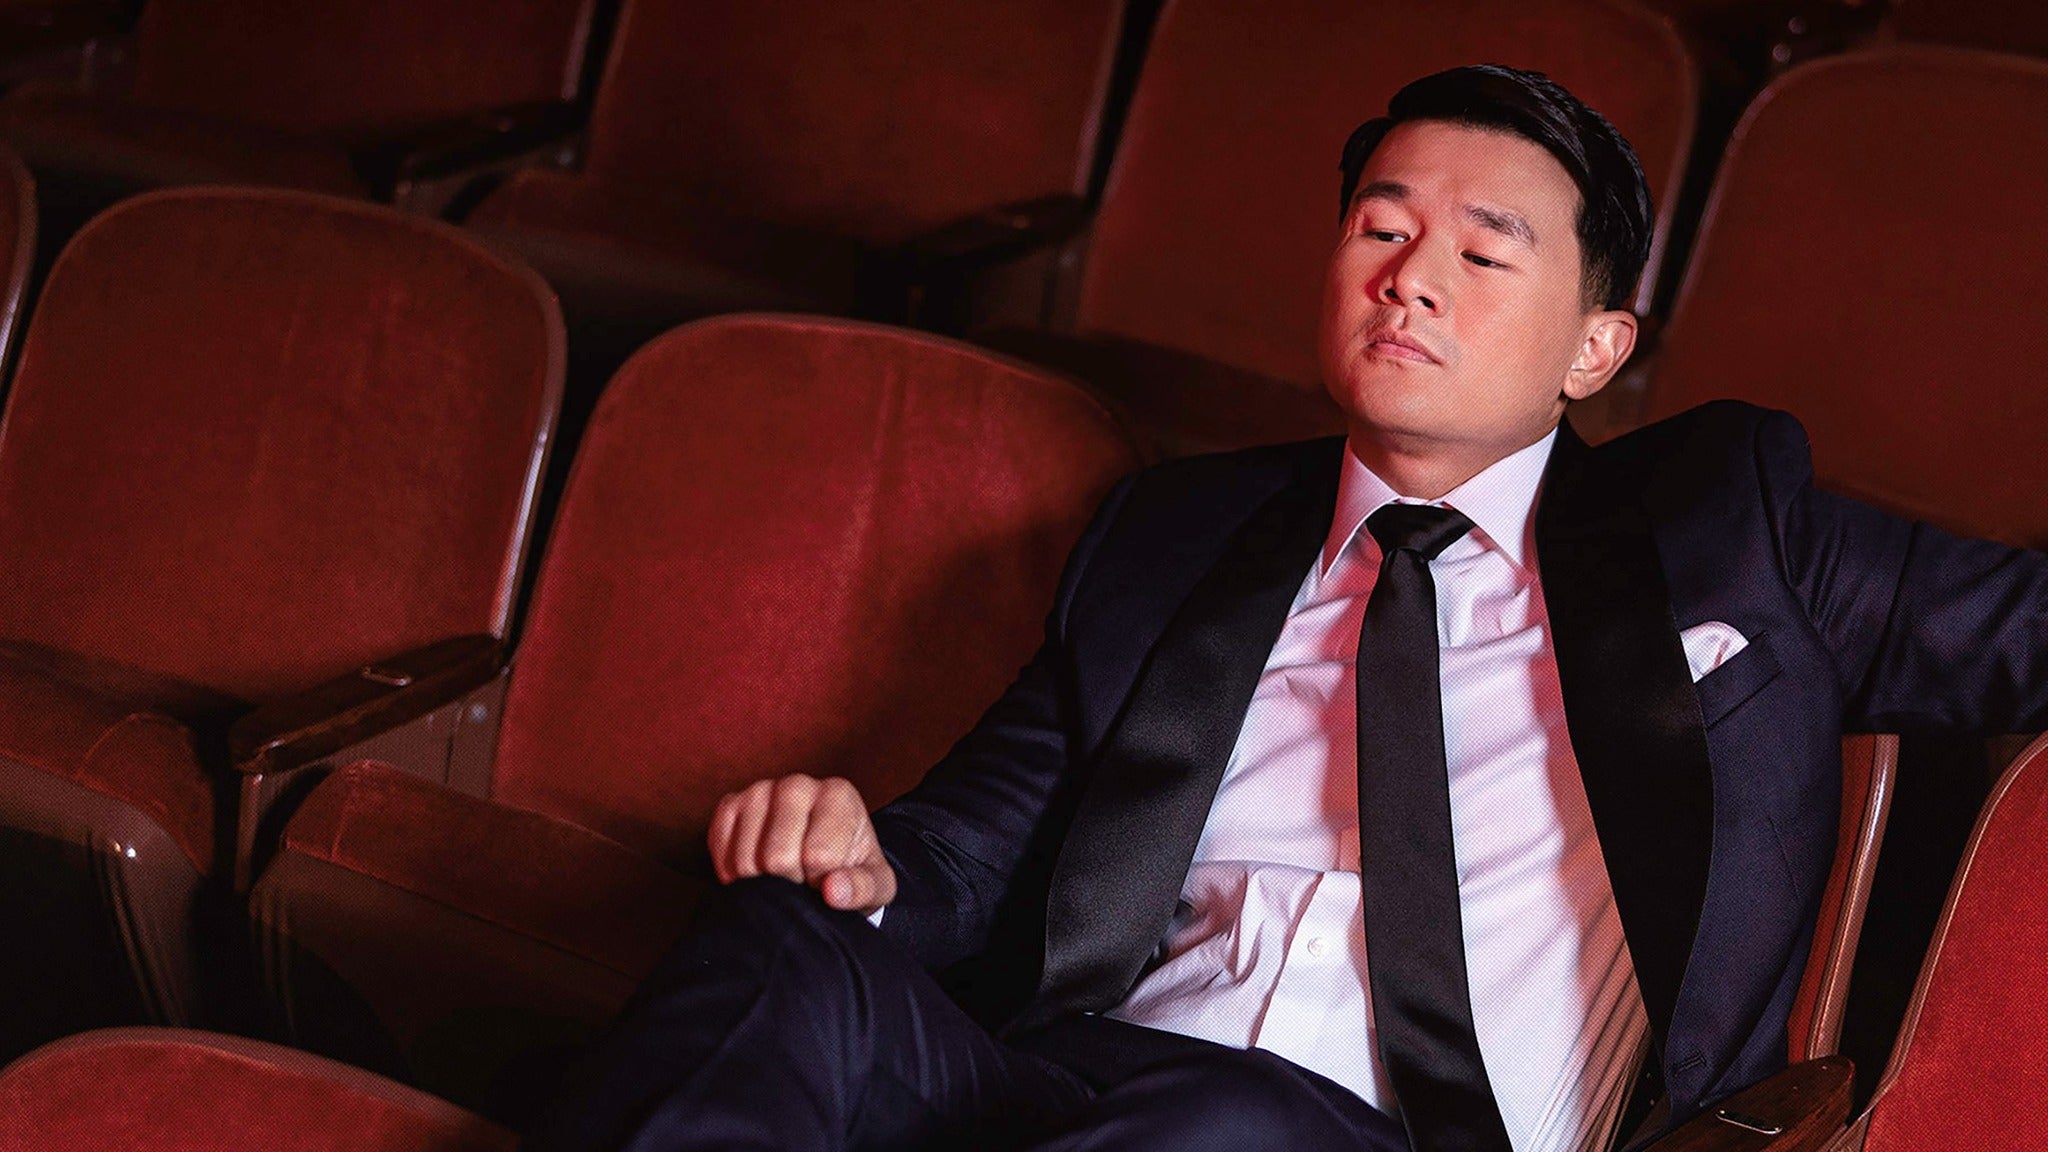 Ronny Chieng: Hope You Get Rich Tour presale code for show tickets in Chicago, IL (The Chicago Theatre)